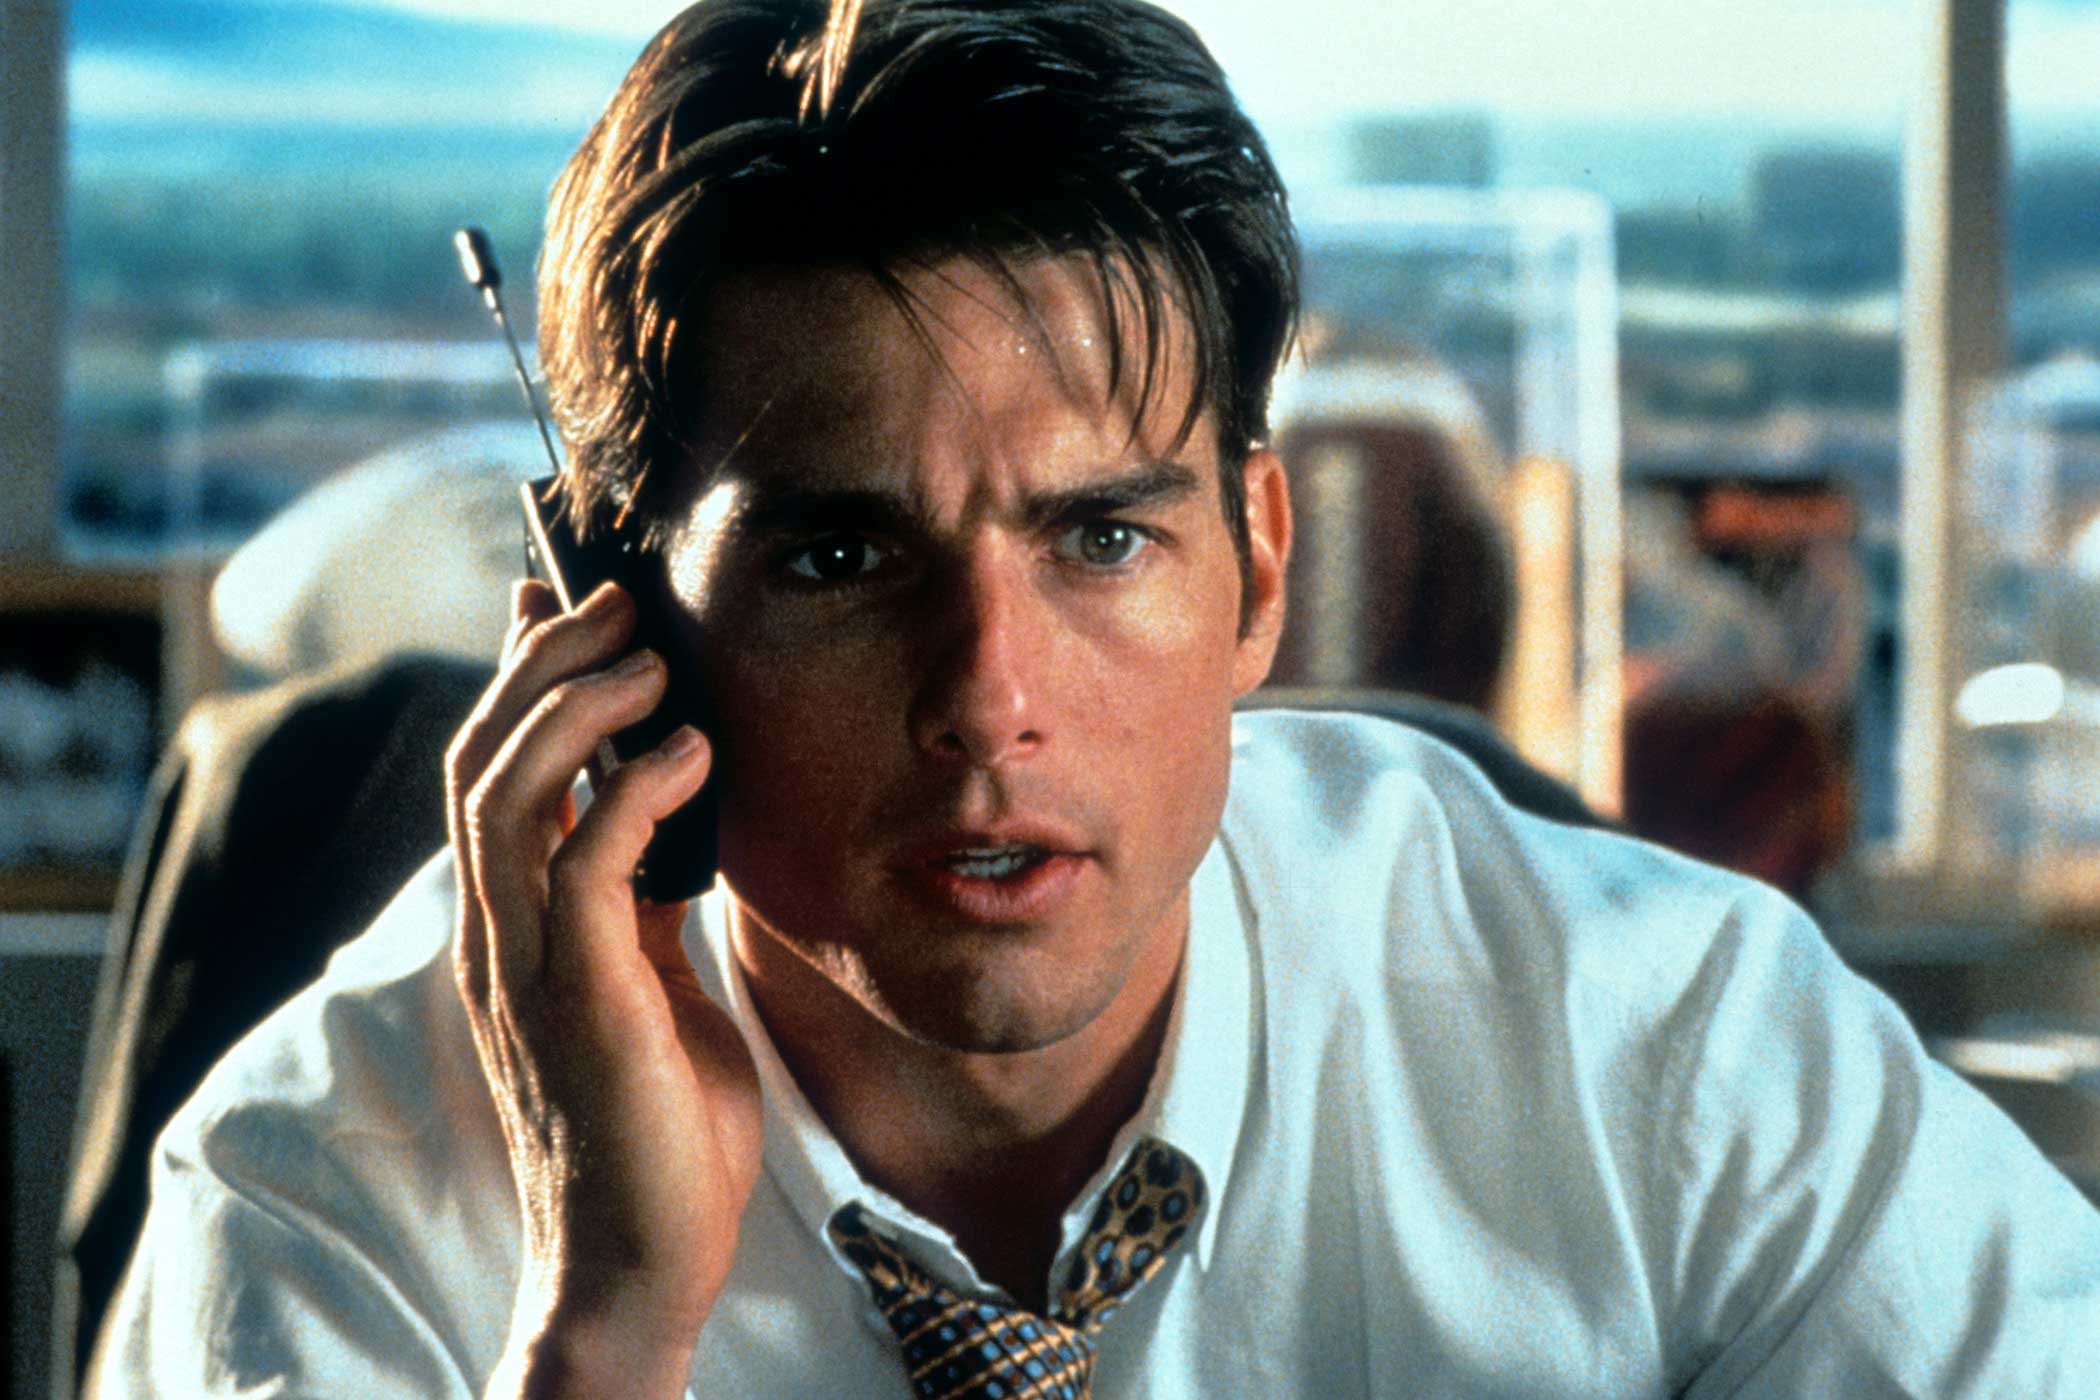 Jerry Maguire, 1996